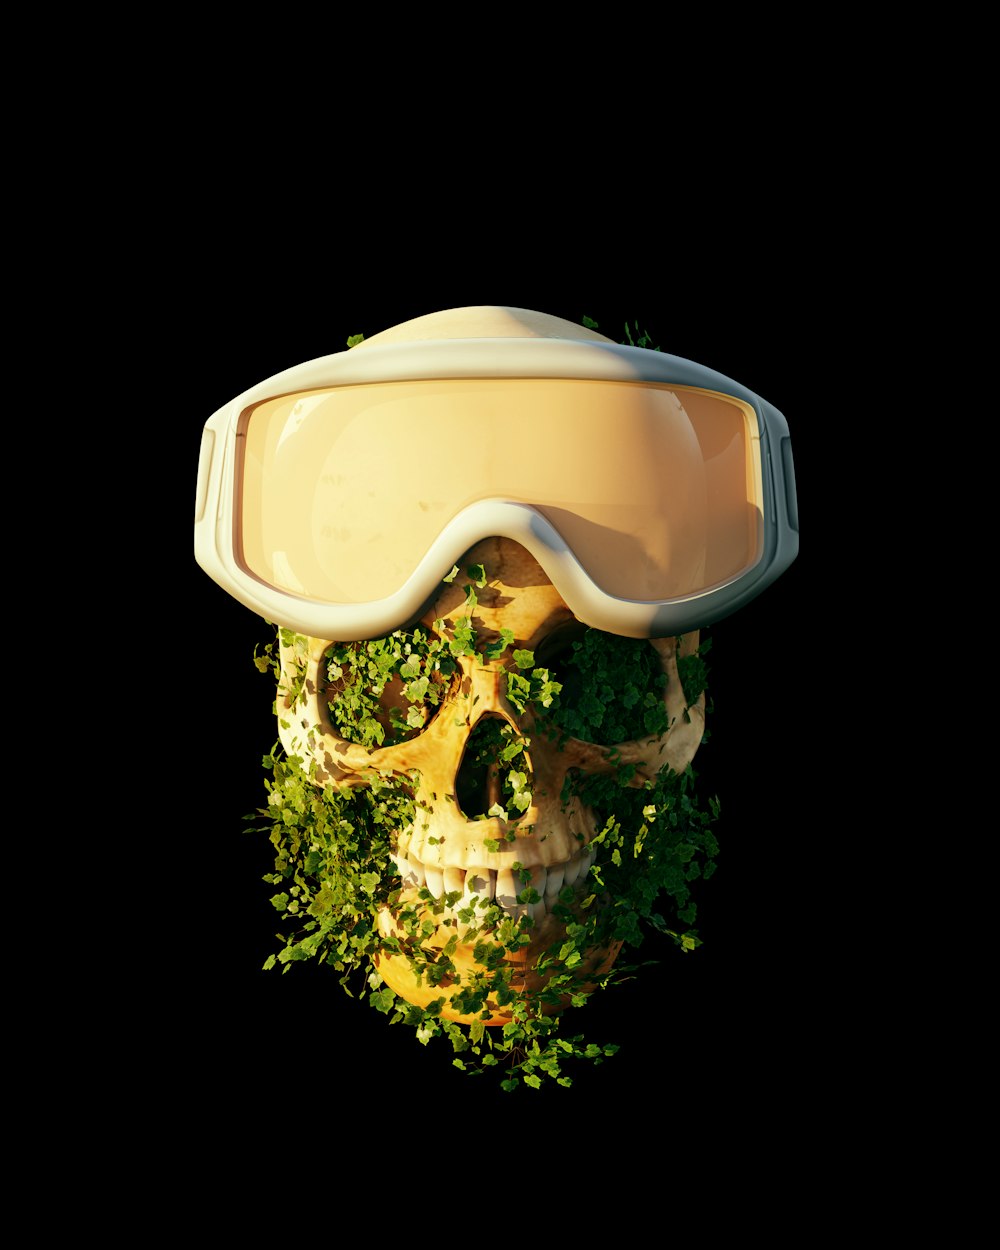 a skull wearing a goggles with a plant growing out of it